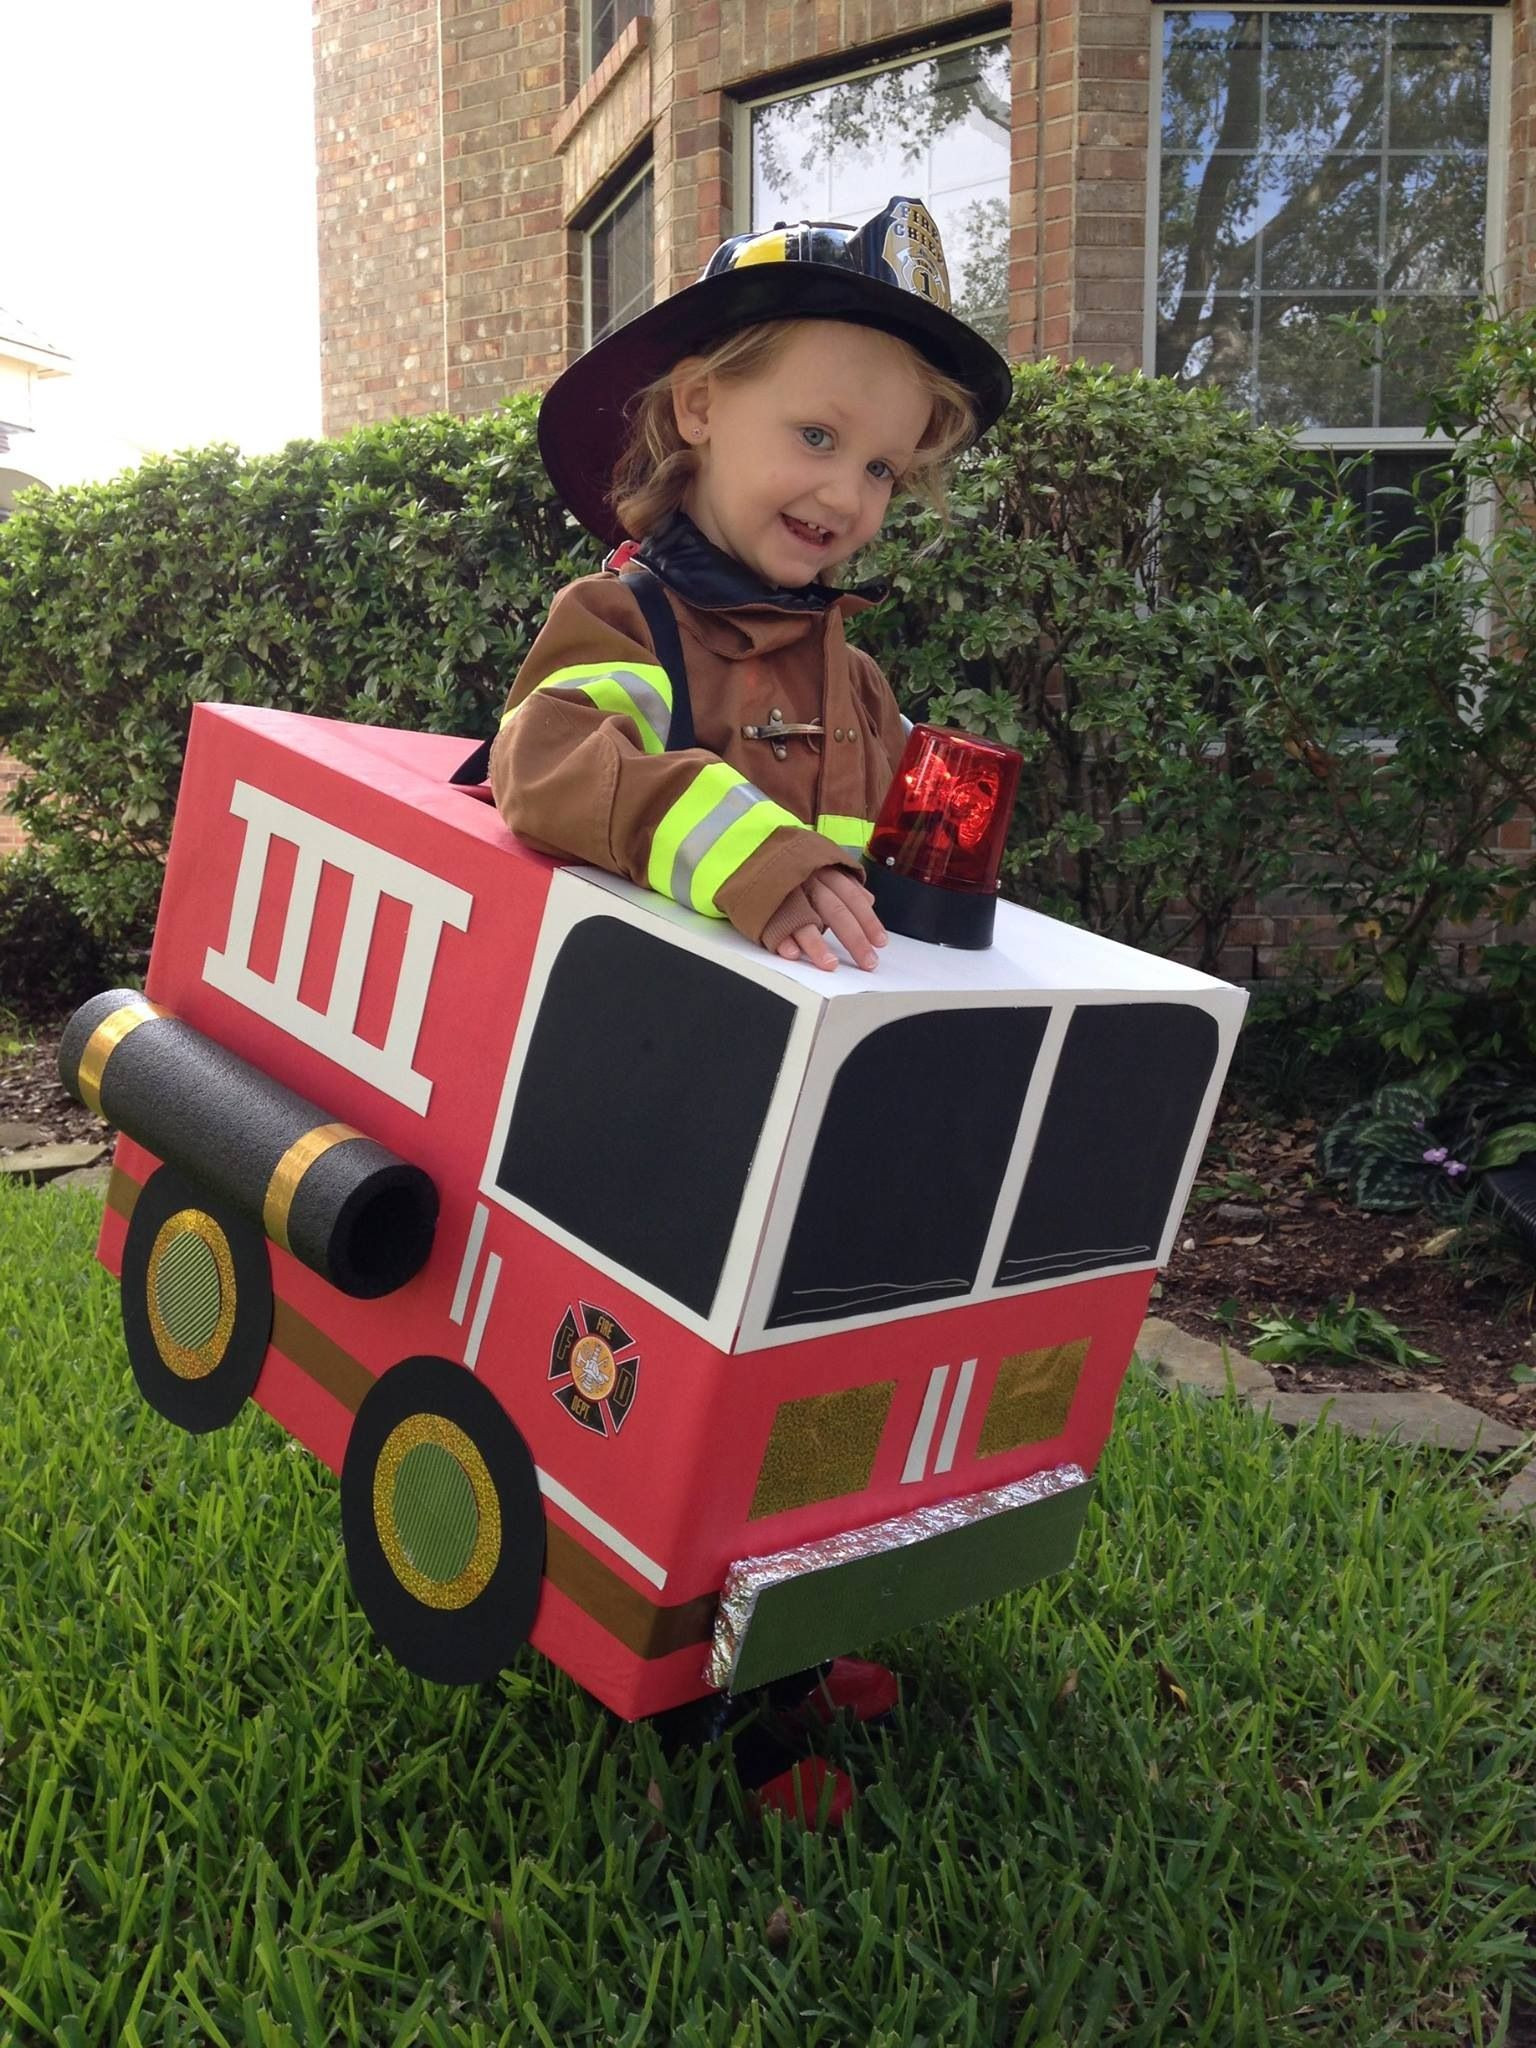 Firefighter Costume DIY
 The perfect firefighter costume plete with fire